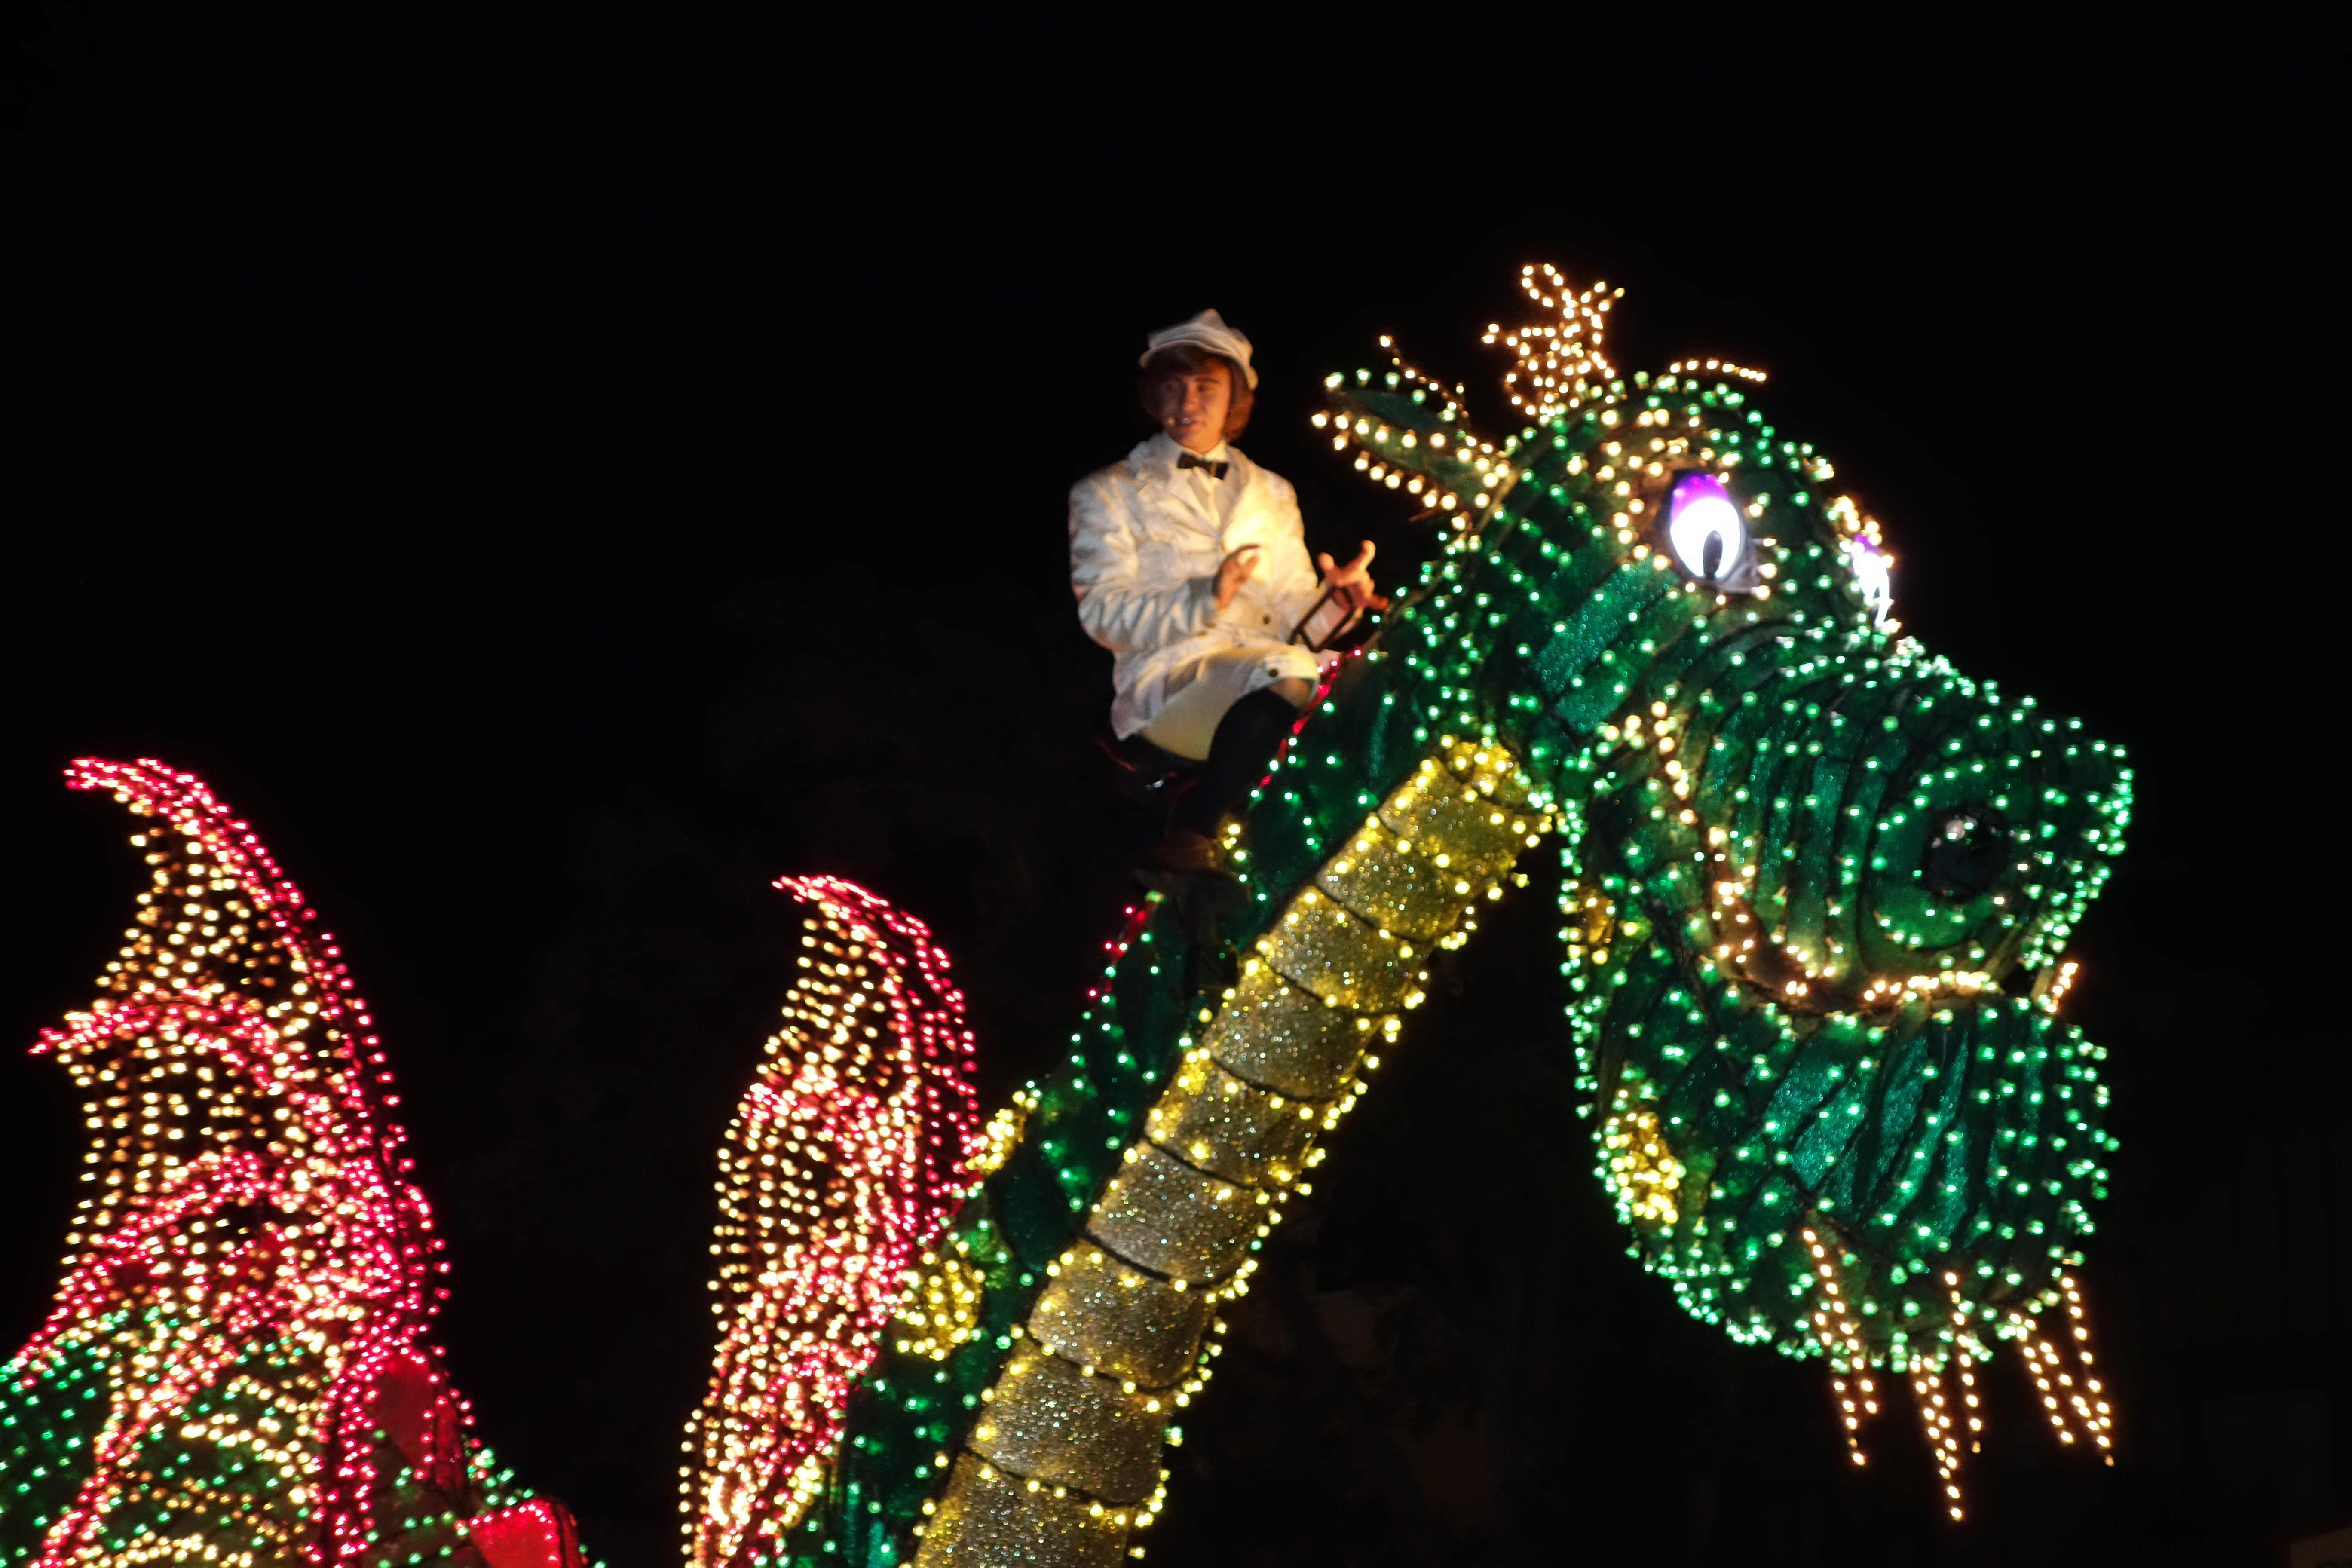 Main Street Electrical Parade to return to Disneyland with another hard ticket event